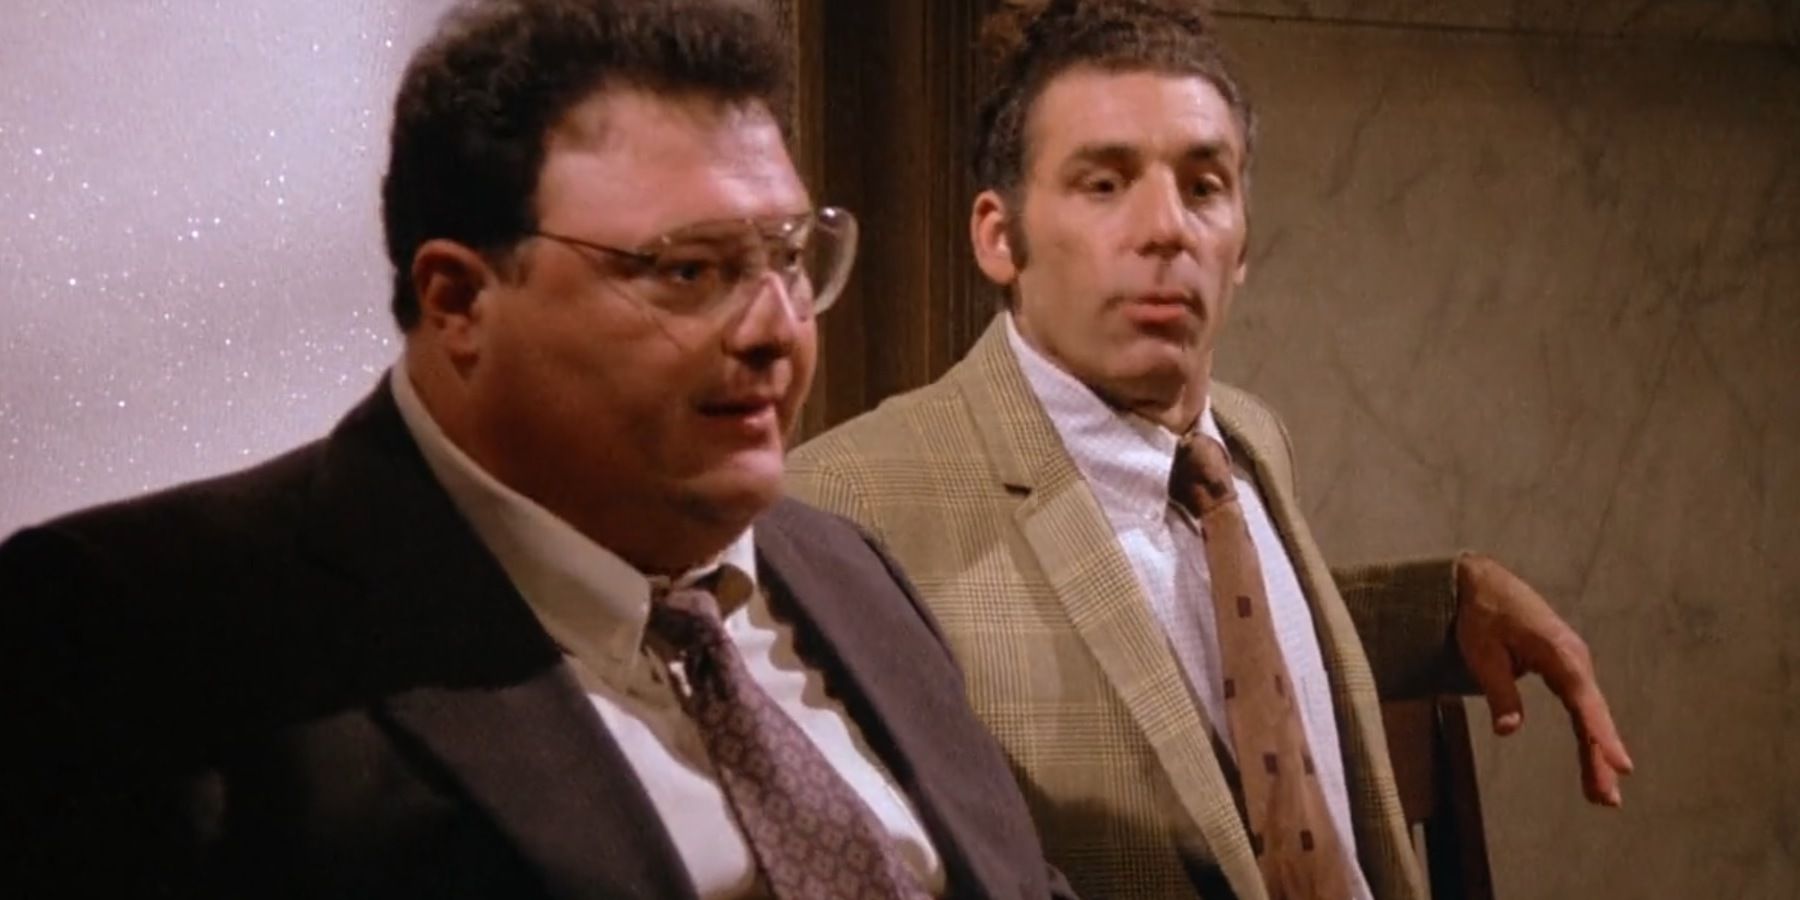 Newman and Kramer wearing suits on Seinfeld